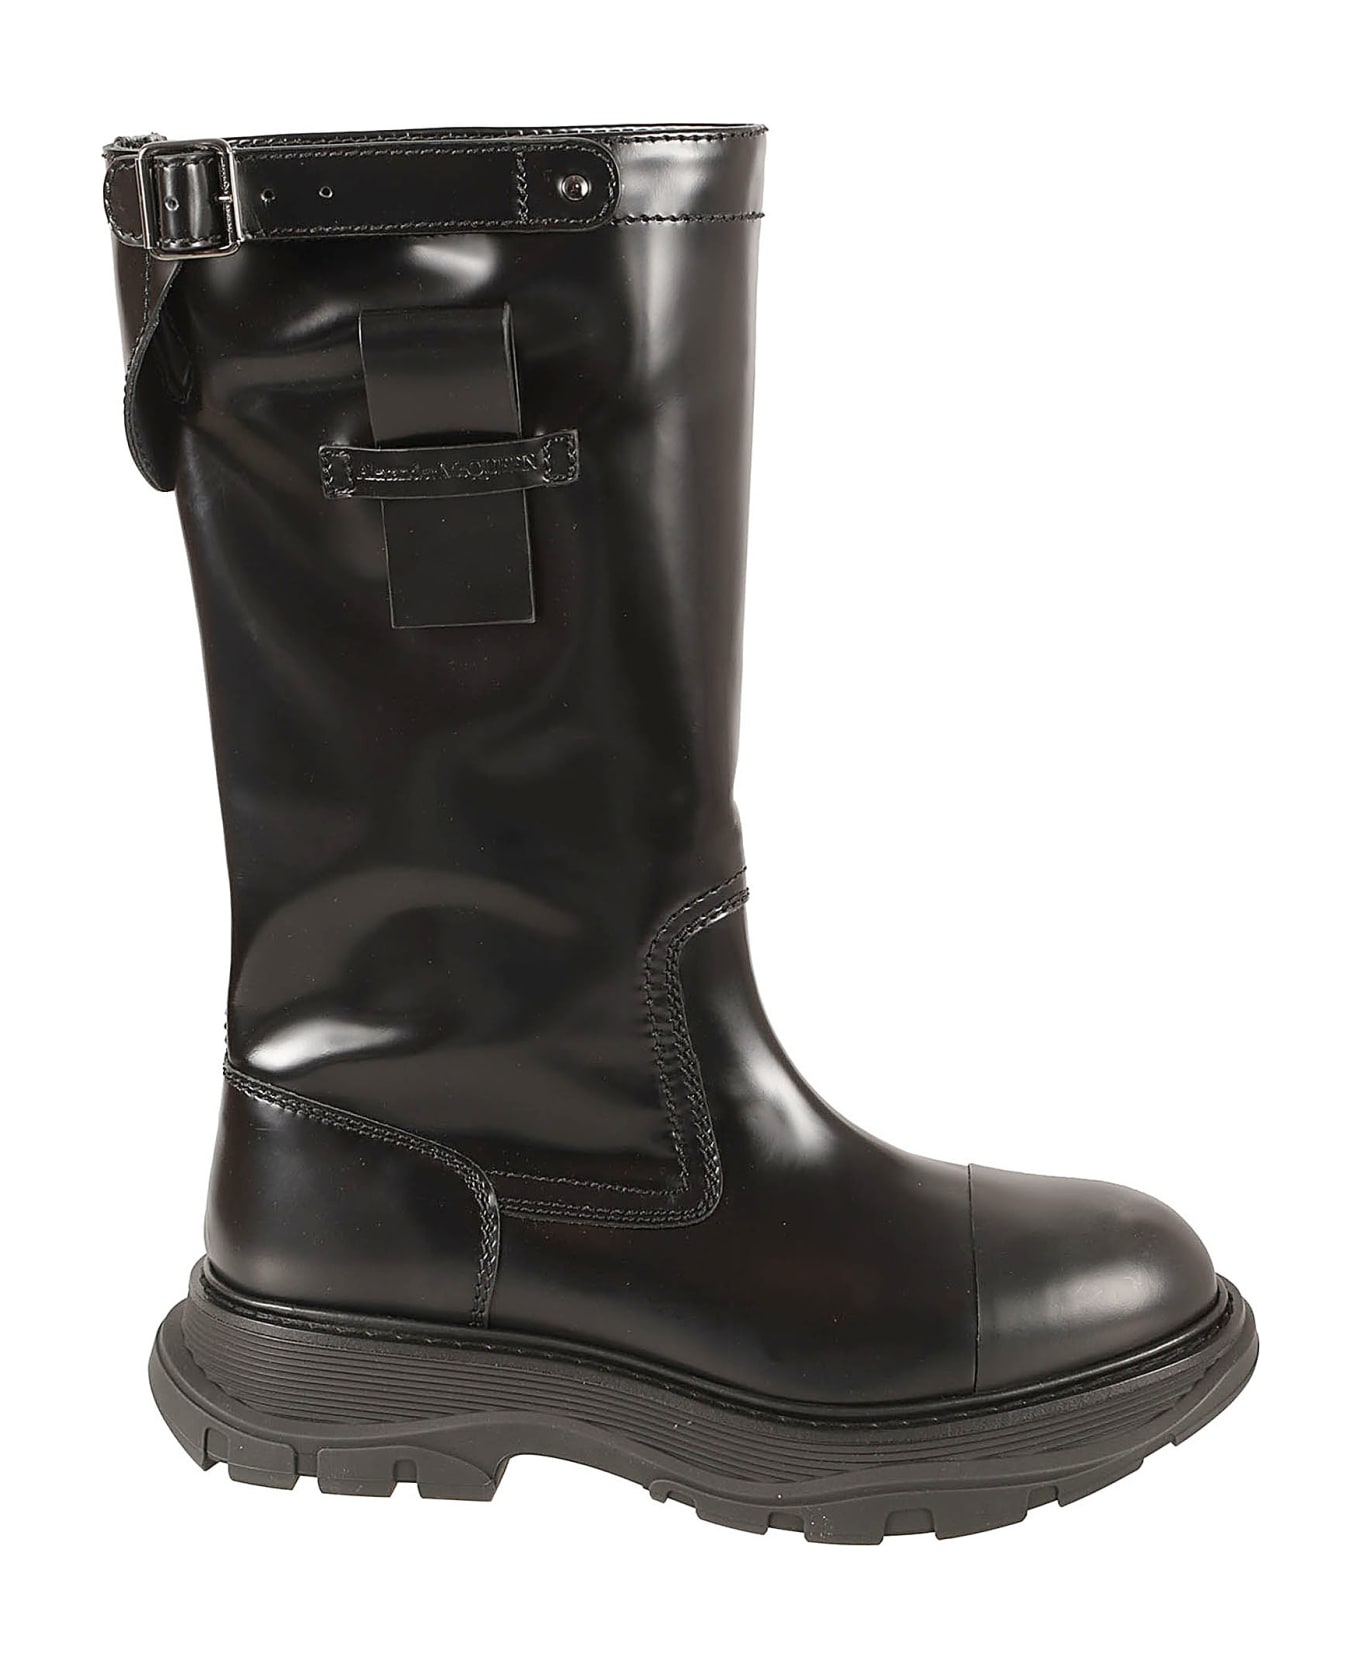 Alexander McQueen Game Leather Boots - Black ブーツ